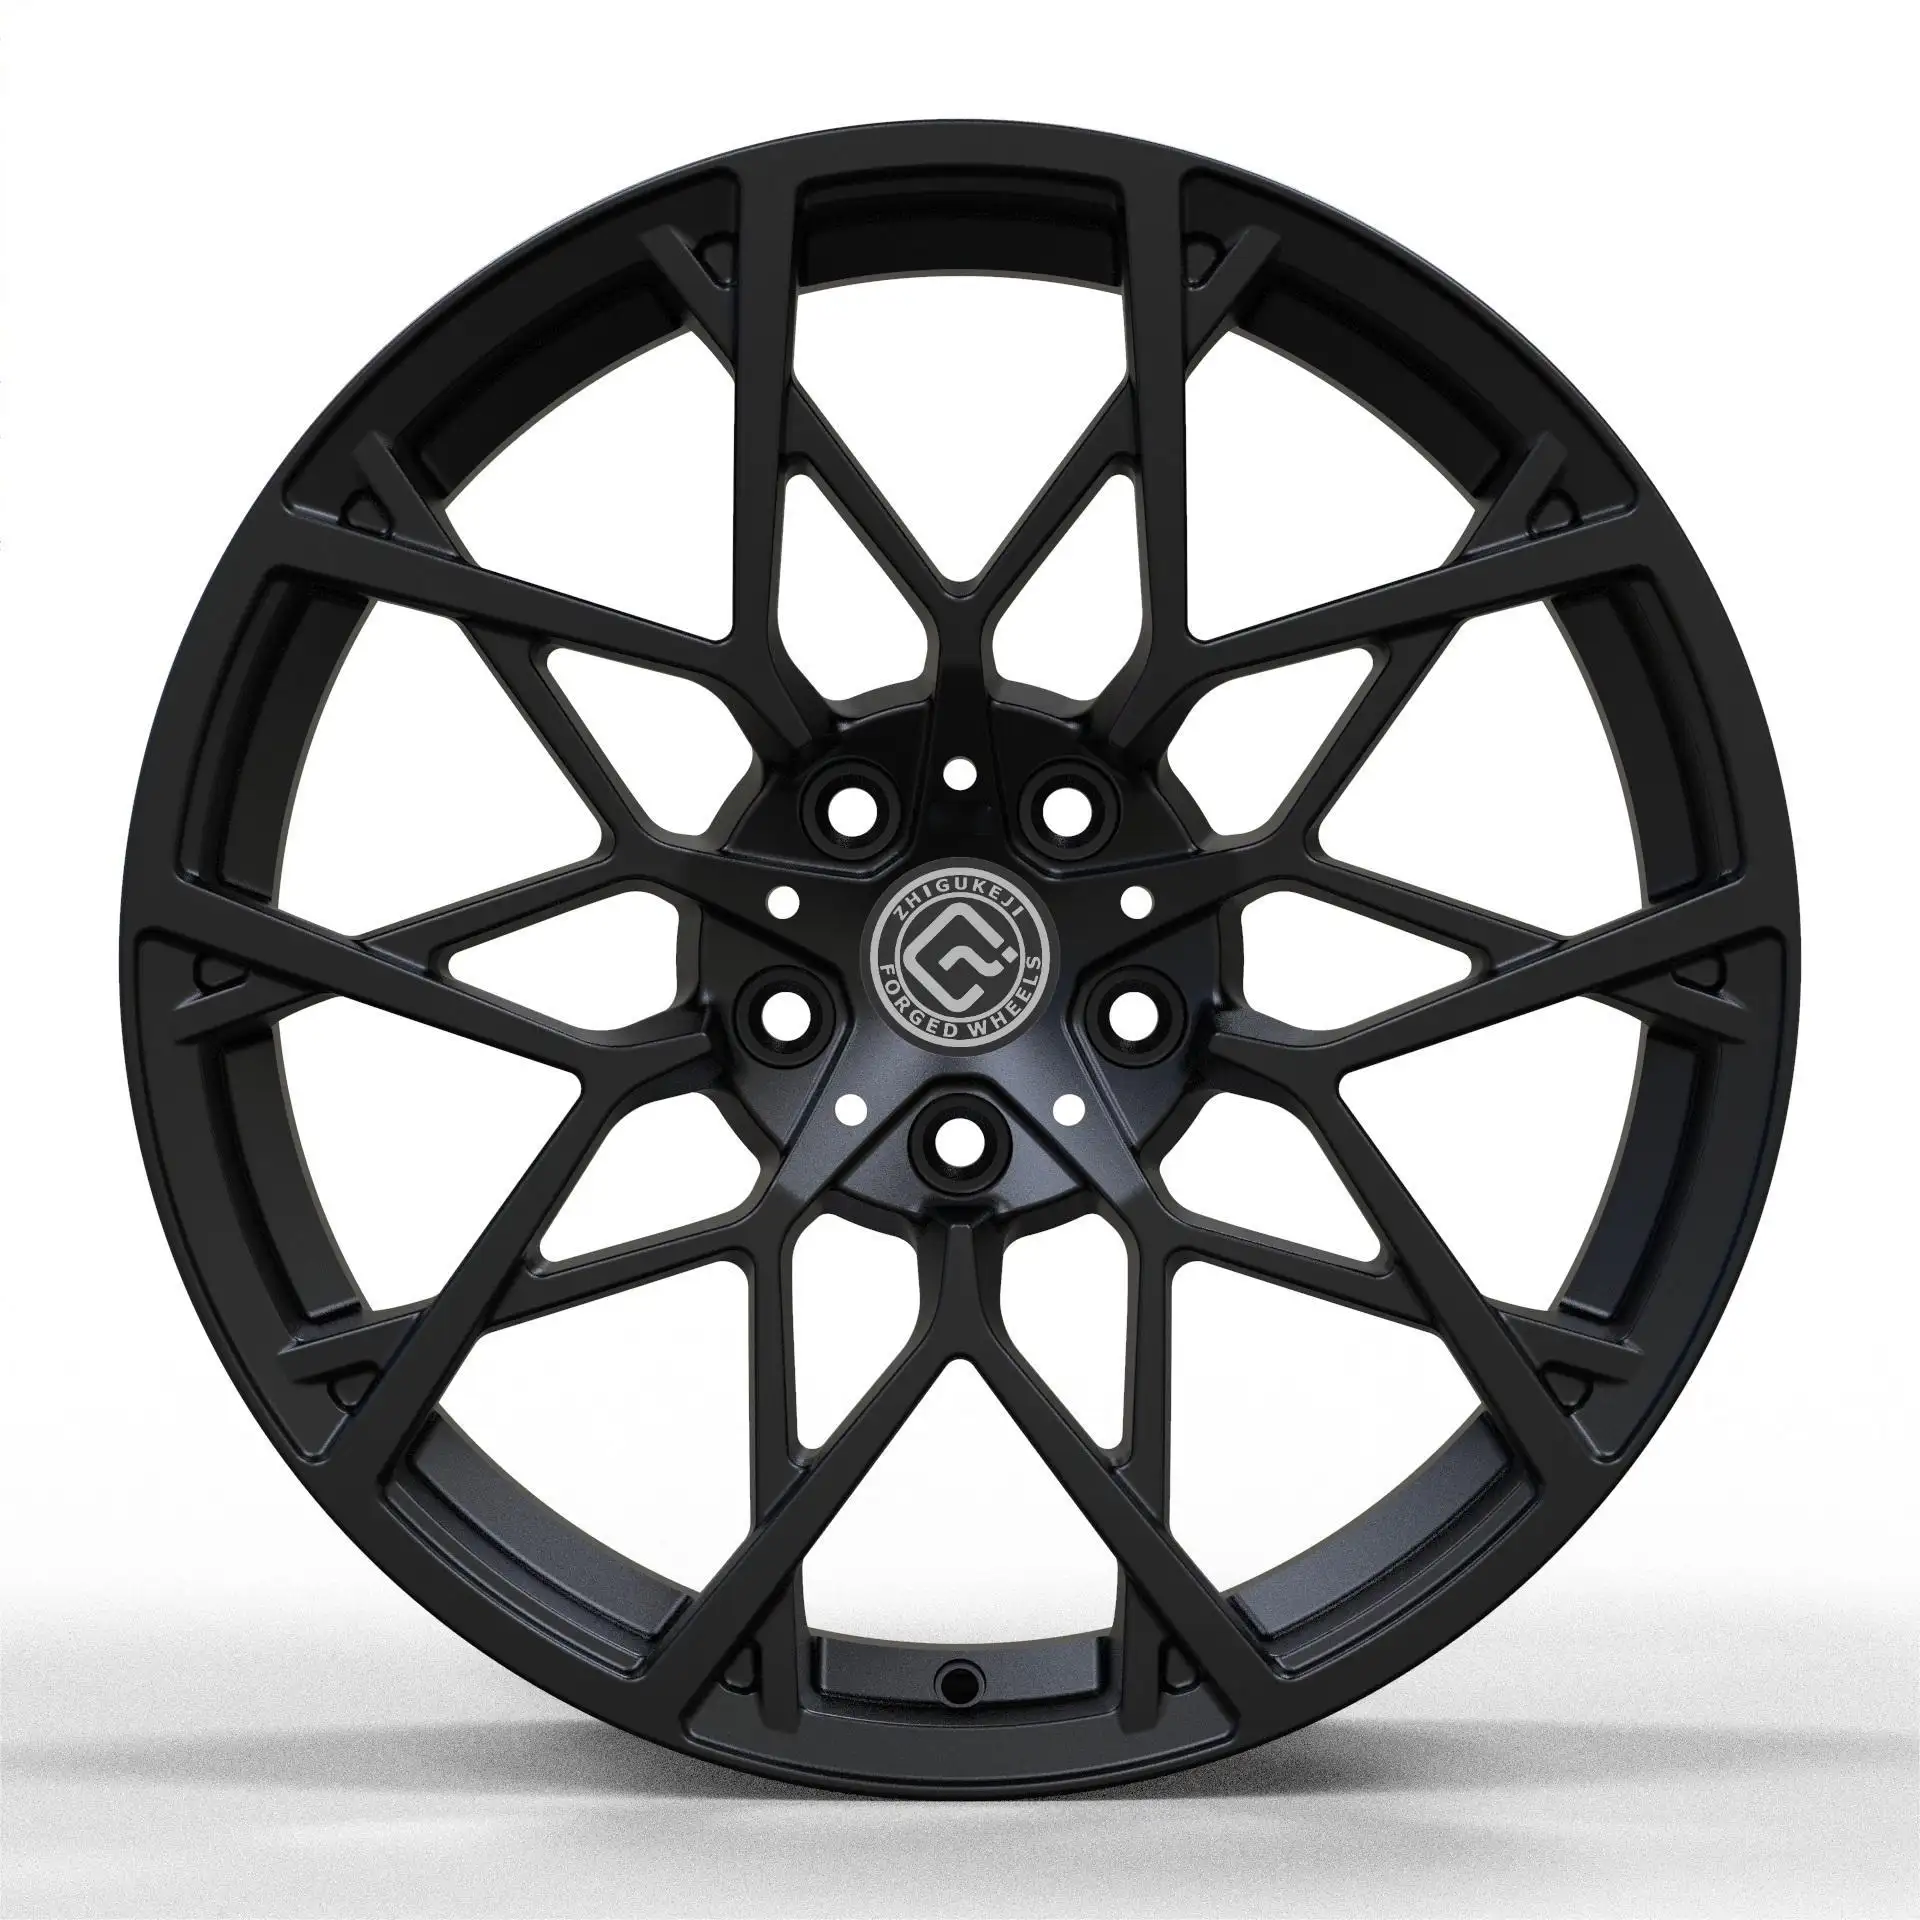 17 Inch Luxury Forged Alloy Wheels 5x120 Premium Wheels-Polished with 112mm 100mm 120mm PCDs and 0mm ET